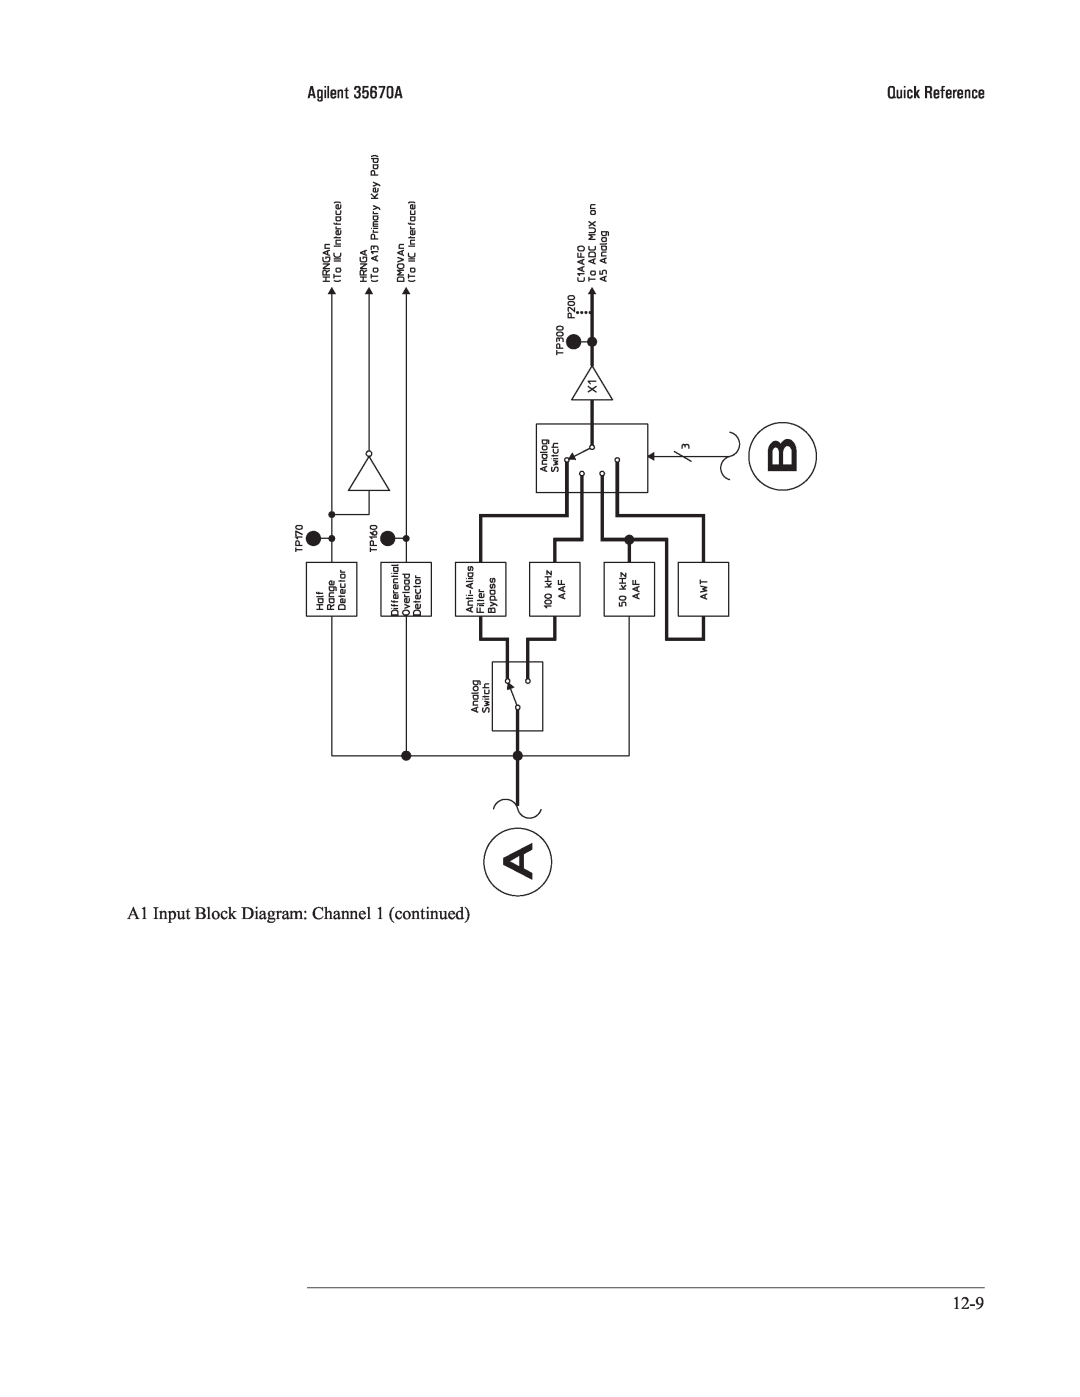 Agilent Technologies 35670-90066 manual Agilent 35670A, A1 Input Block Diagram: Channel 1 continued, Quick Reference 